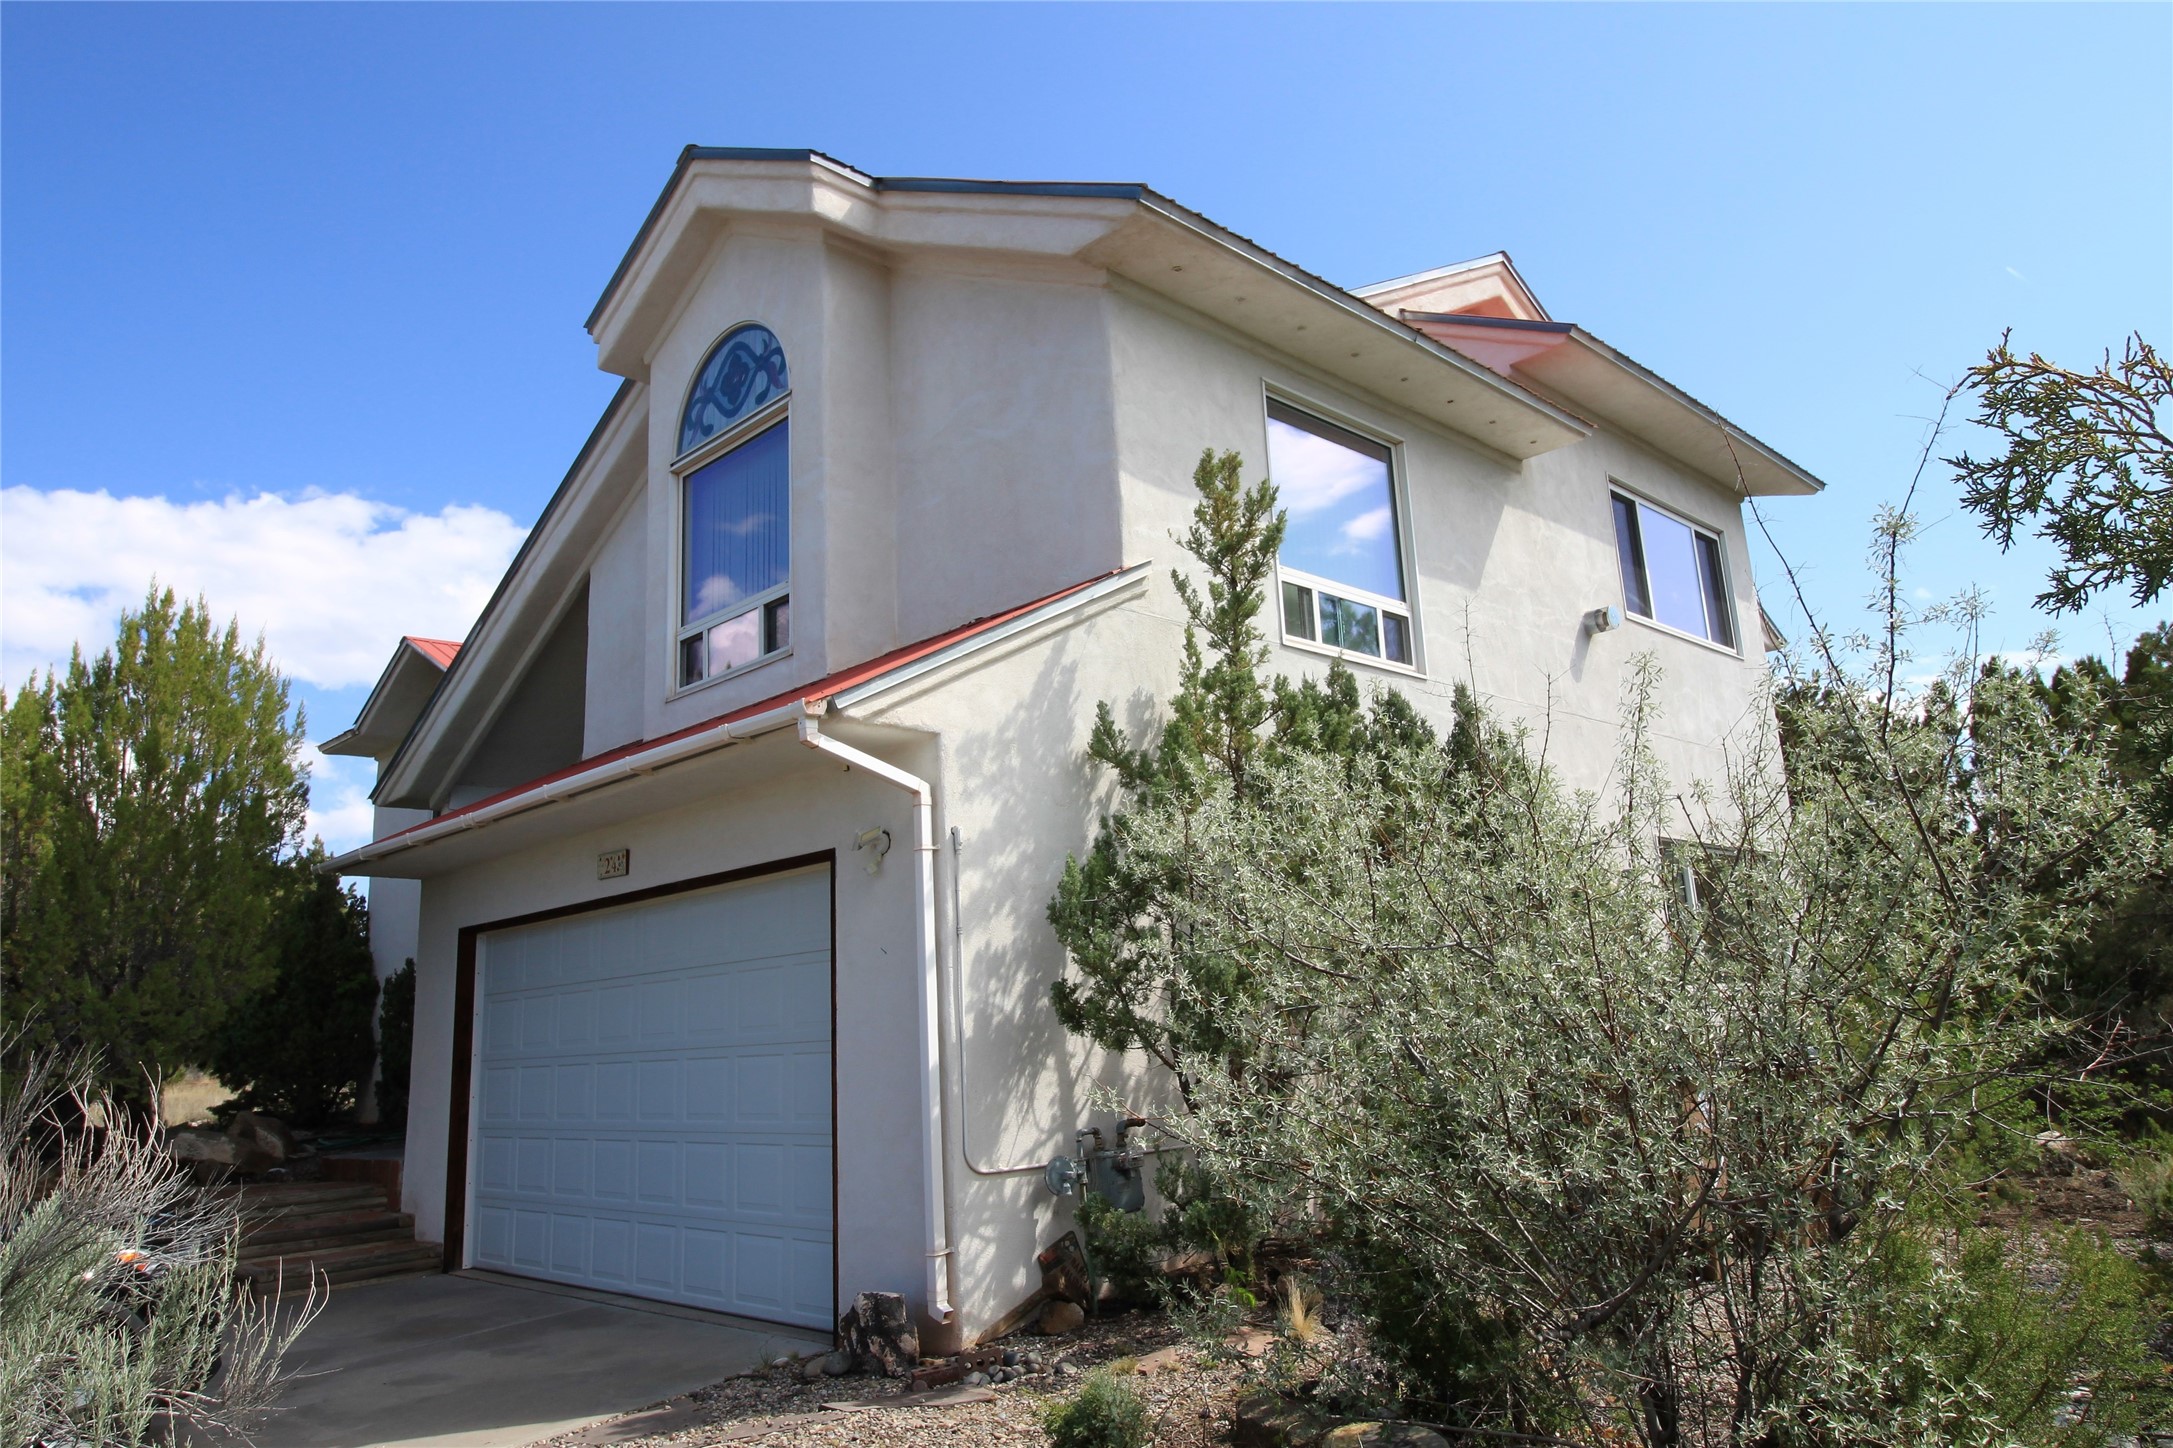 24 Grand Canyon Drive, White Rock, New Mexico 87547, 4 Bedrooms Bedrooms, ,3 BathroomsBathrooms,Residential,For Sale,24 Grand Canyon Drive,202338300